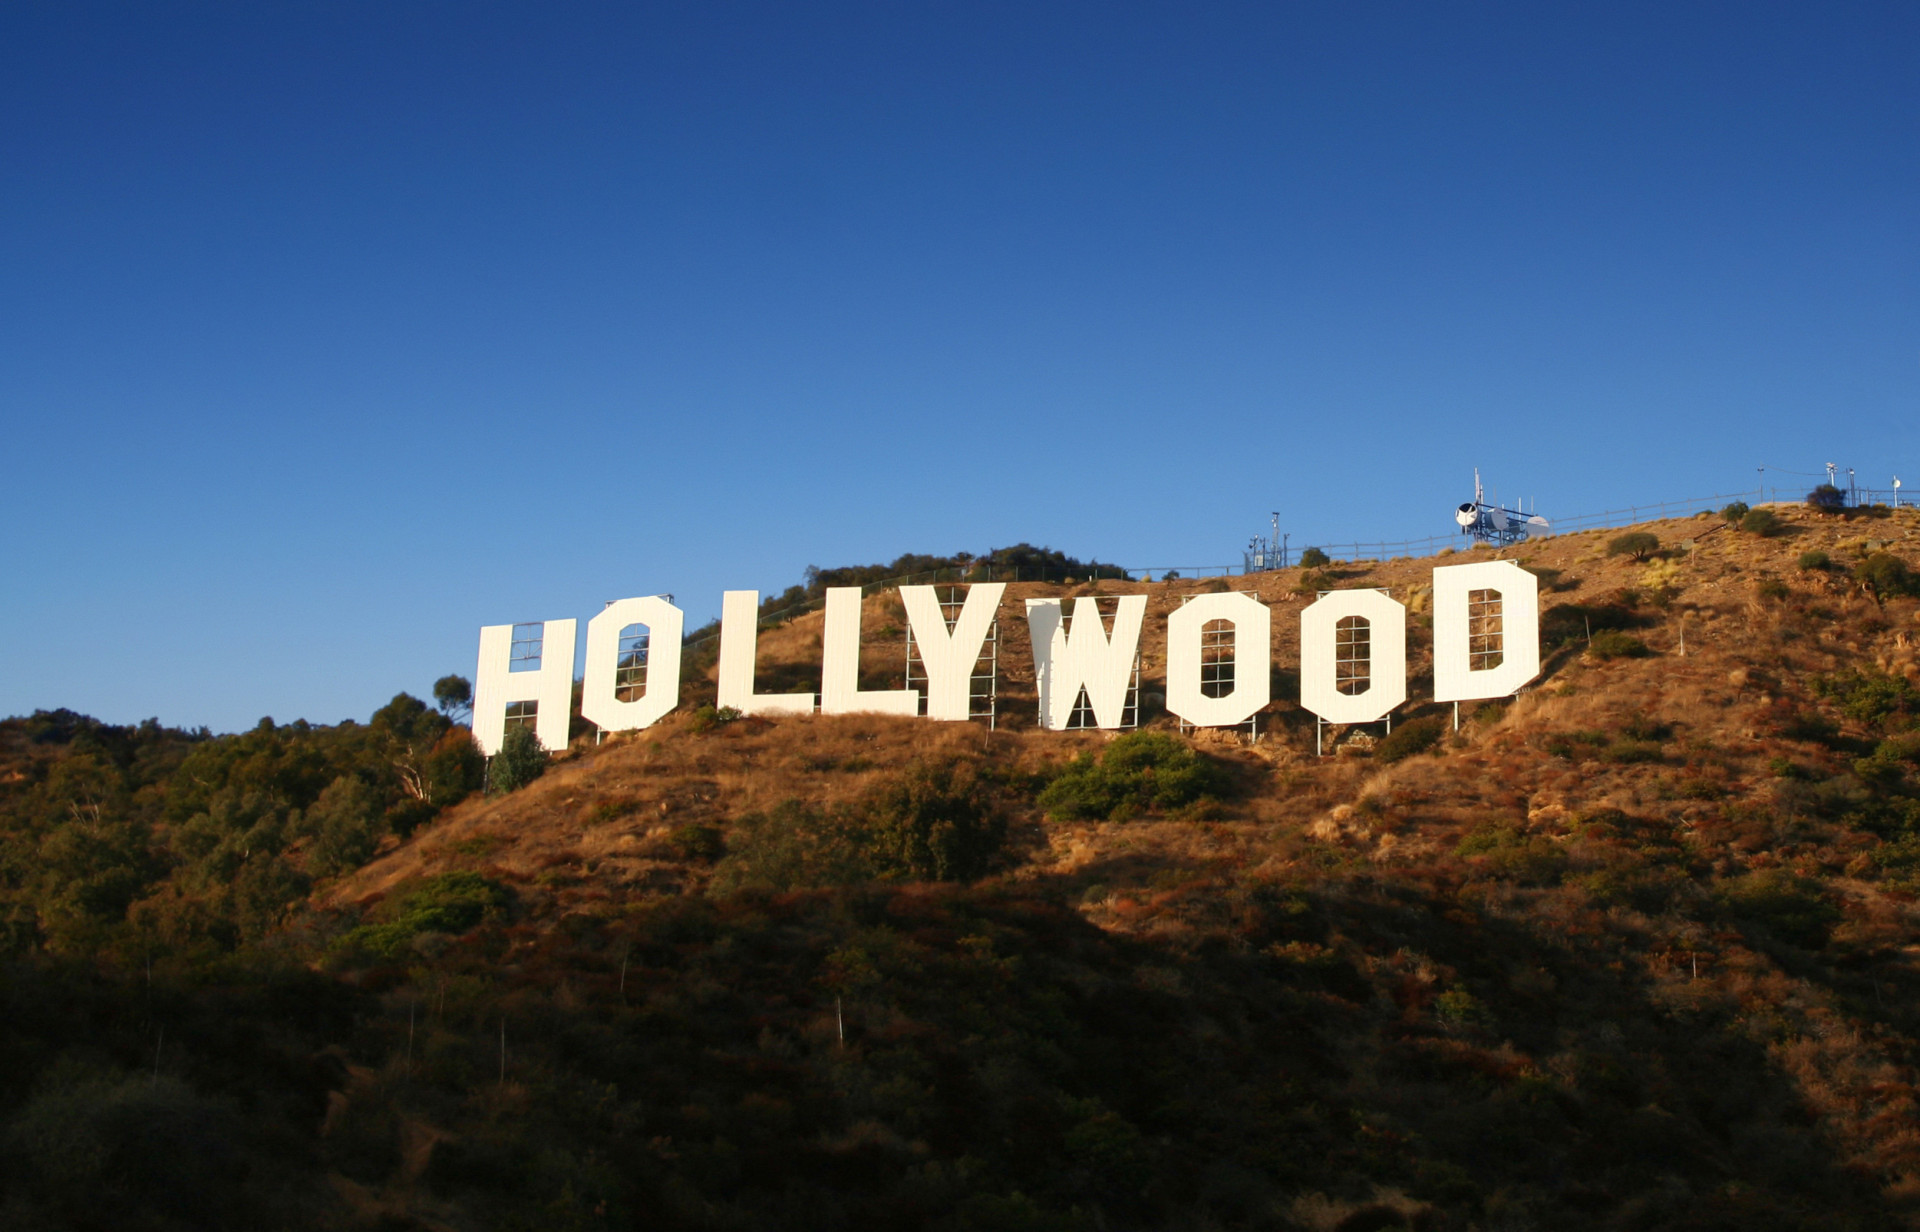 As the entertainment capital, it's not hard to find something fun in Hollywood.<p><a href="https://www.msn.com/en-us/community/channel/vid-7xx8mnucu55yw63we9va2gwr7uihbxwc68fxqp25x6tg4ftibpra?cvid=94631541bc0f4f89bfd59158d696ad7e">Follow us and access great exclusive content every day</a></p>